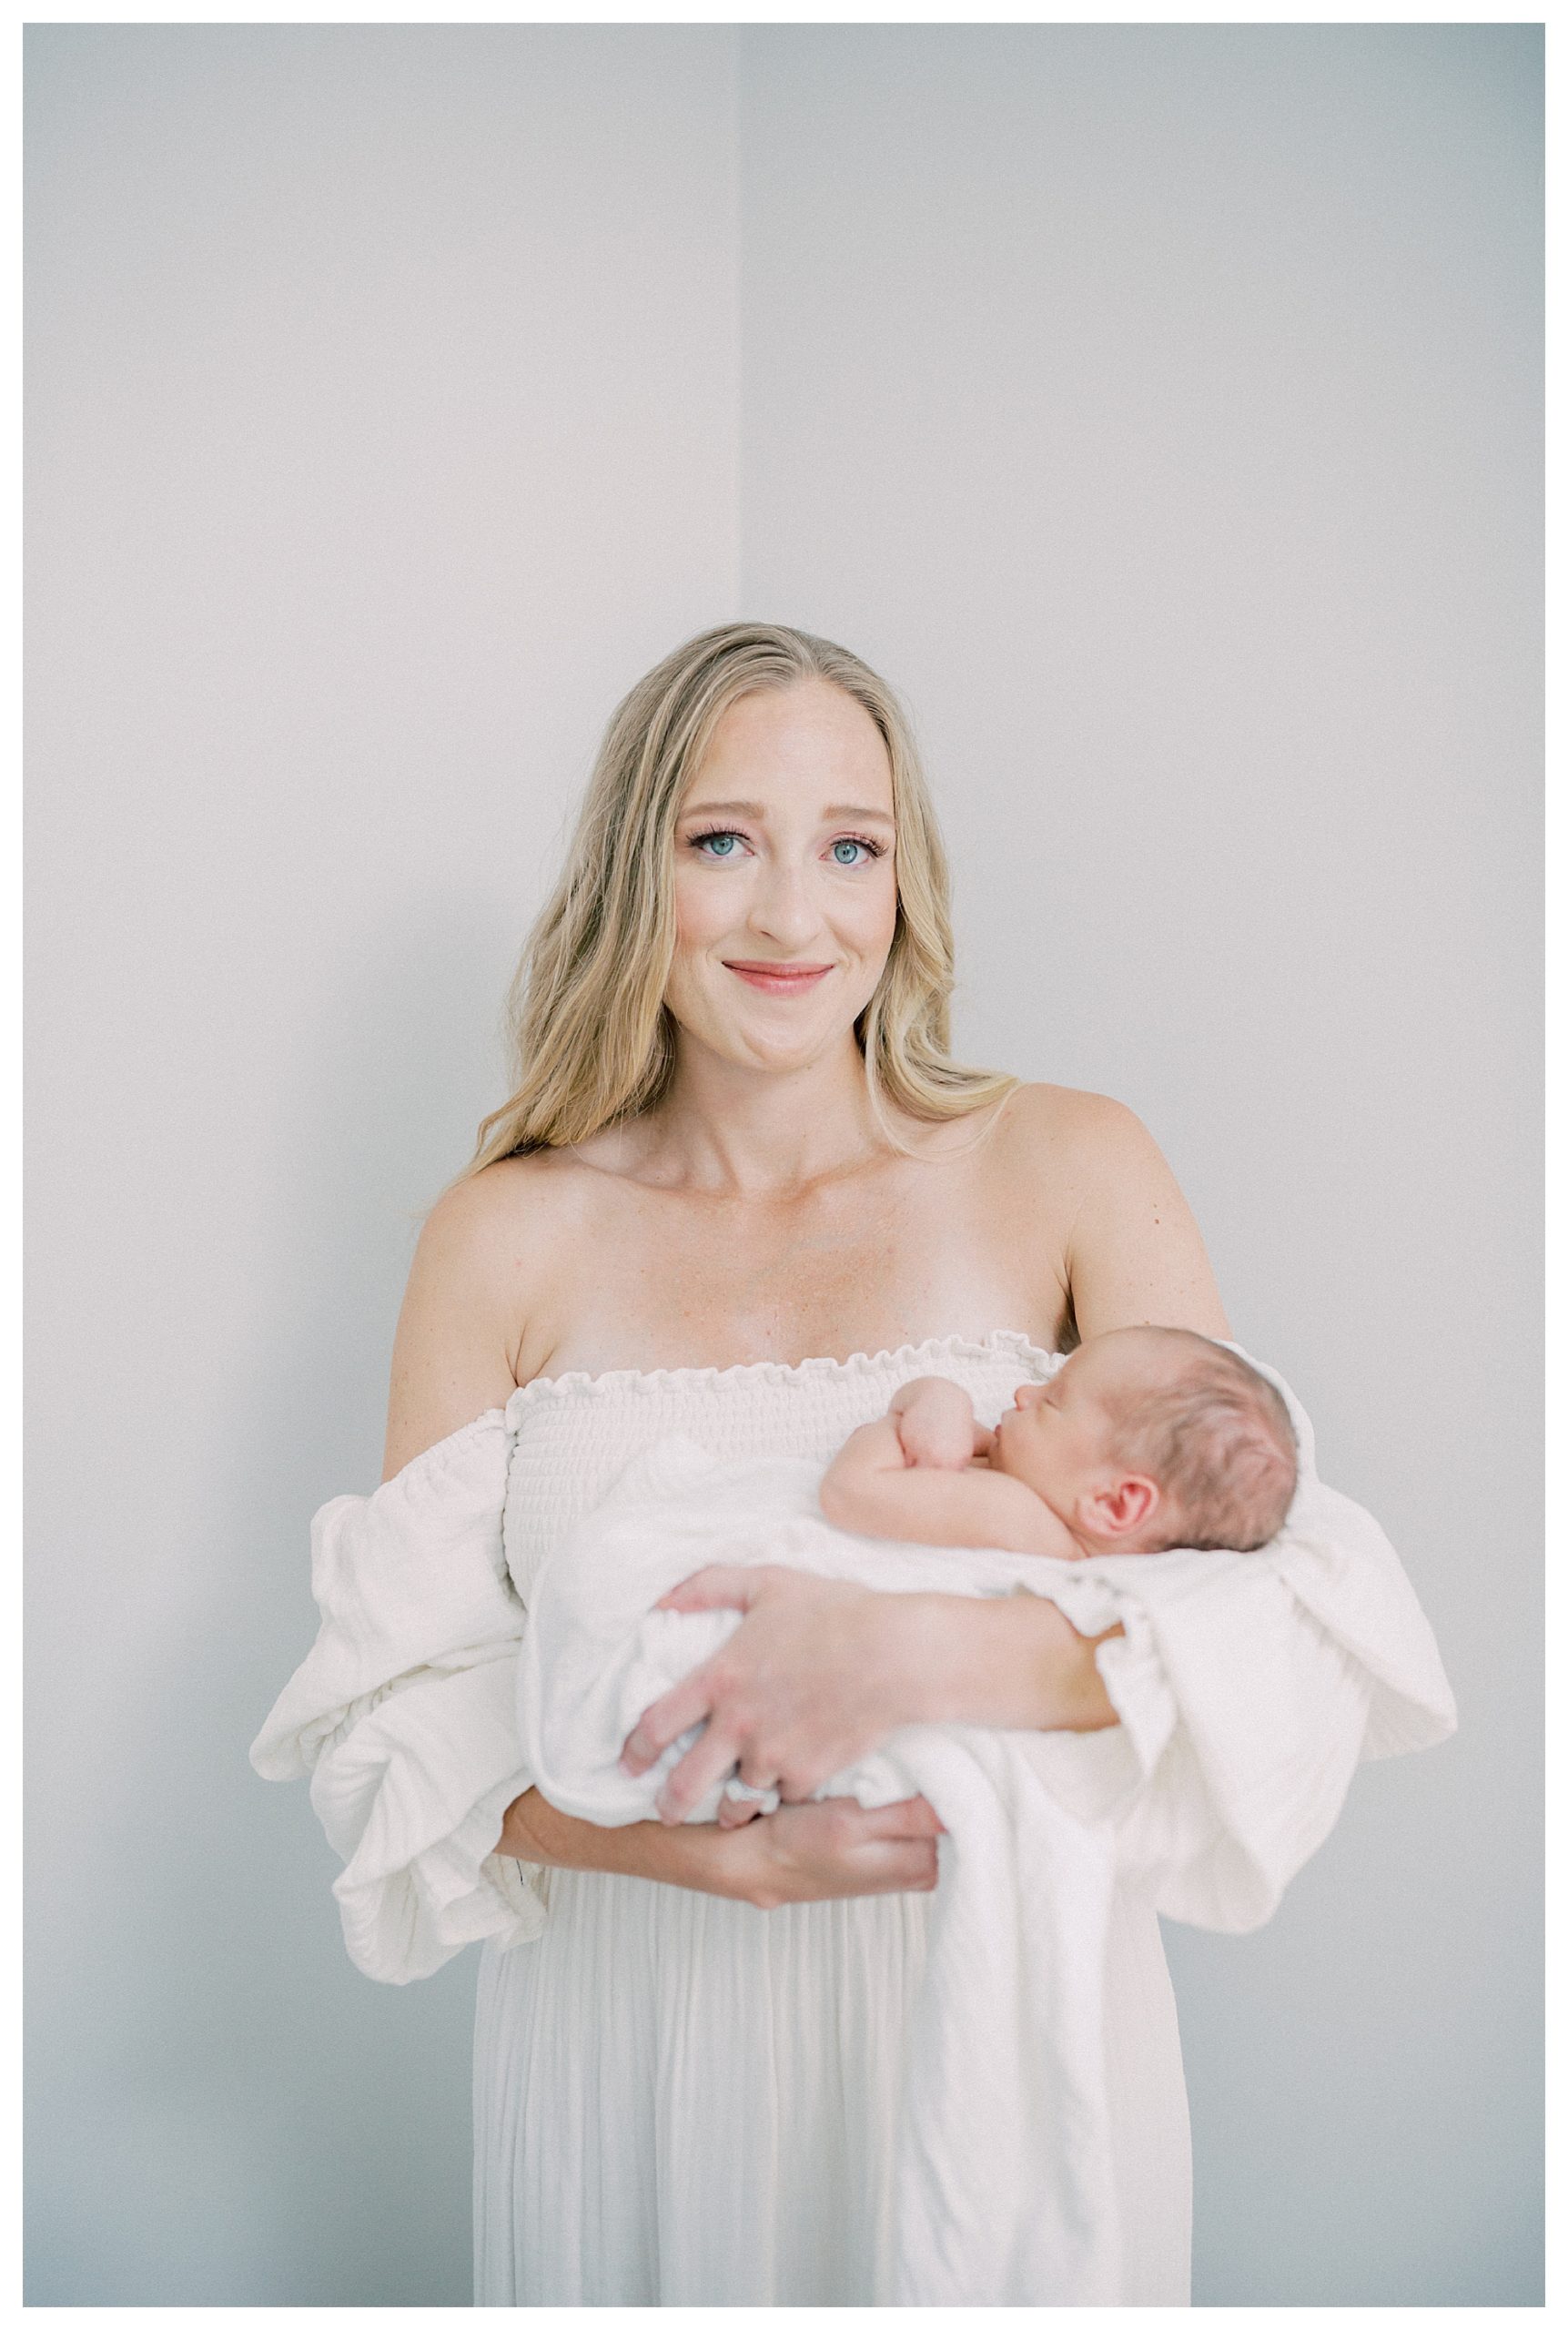 Mother smiles softly while looking at camera, holding newborn son during DC newborn session.